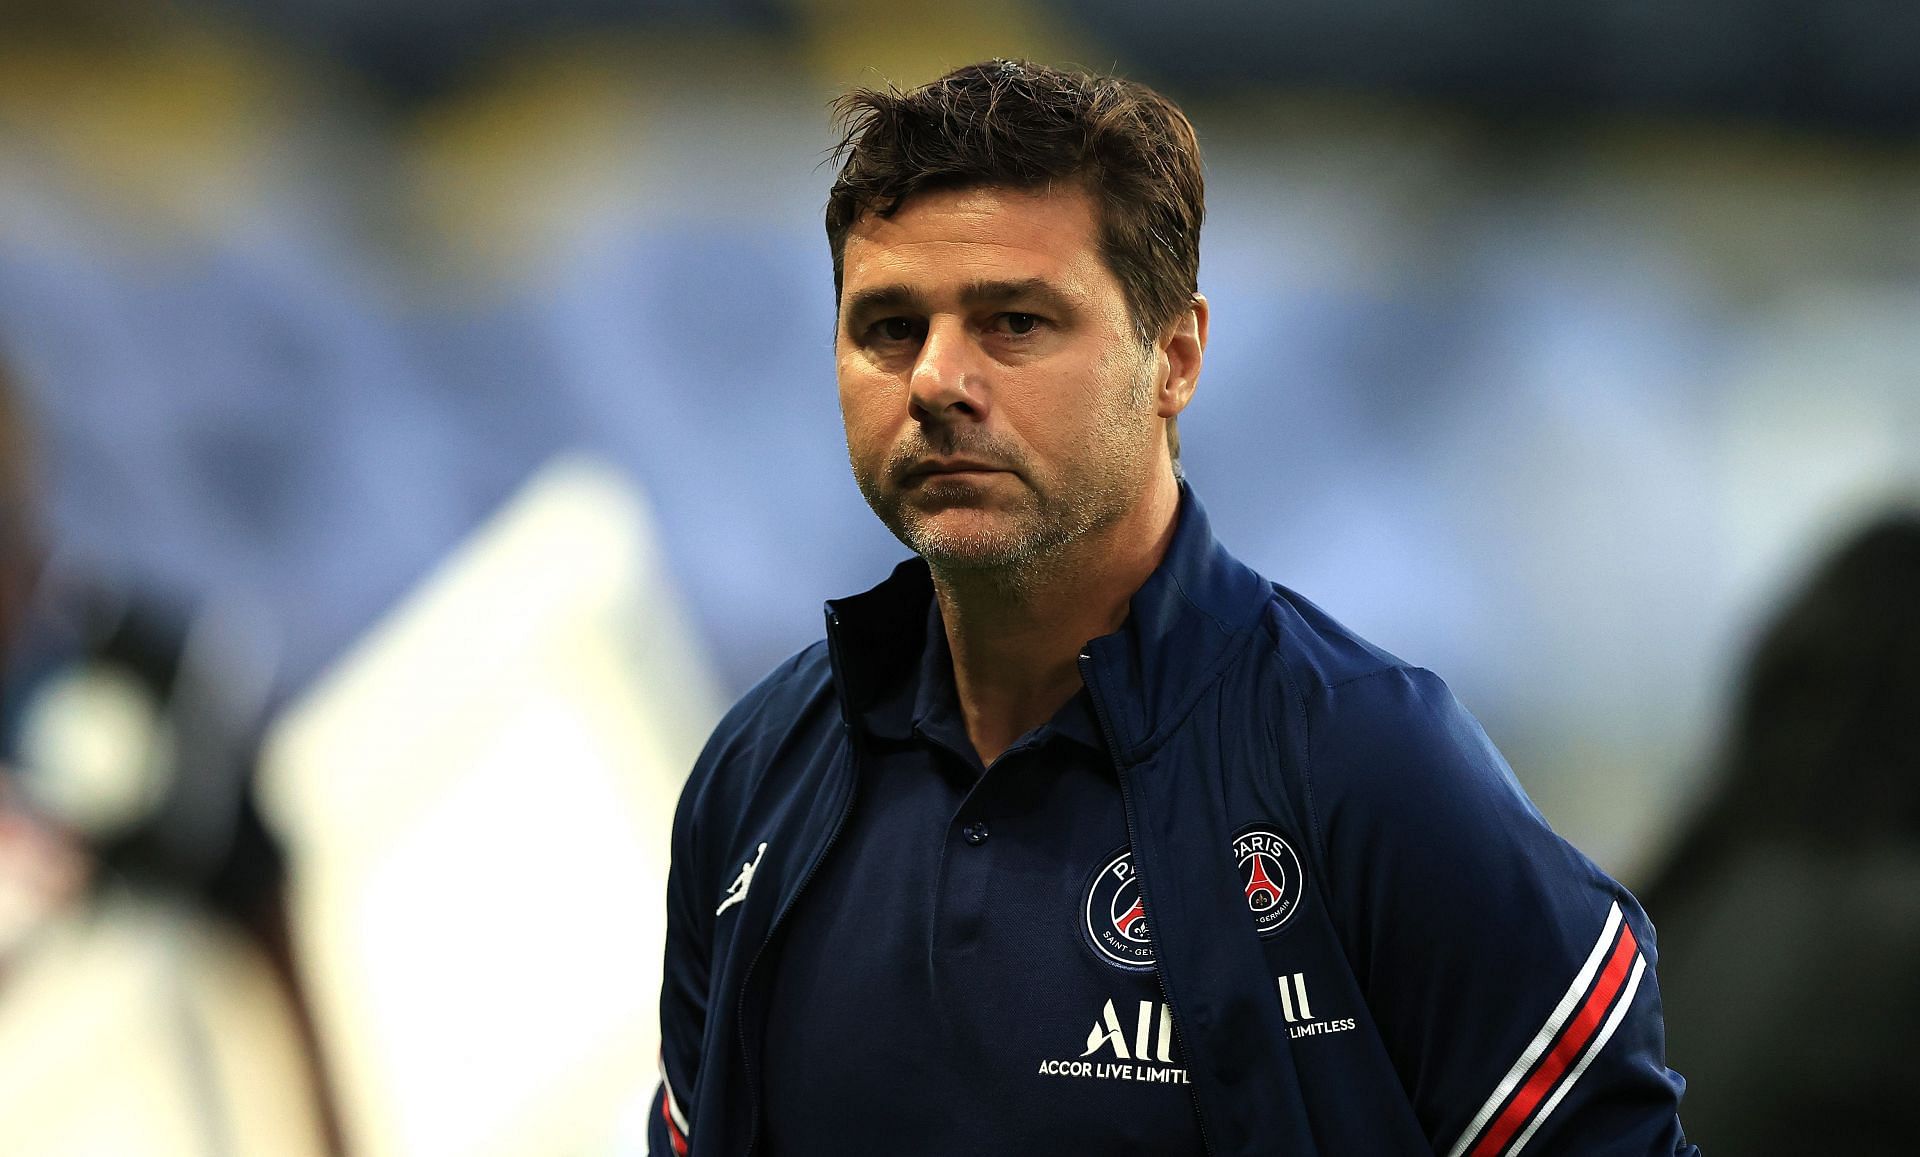 Mauricio Pochettino has been linked with the Manchester United job.